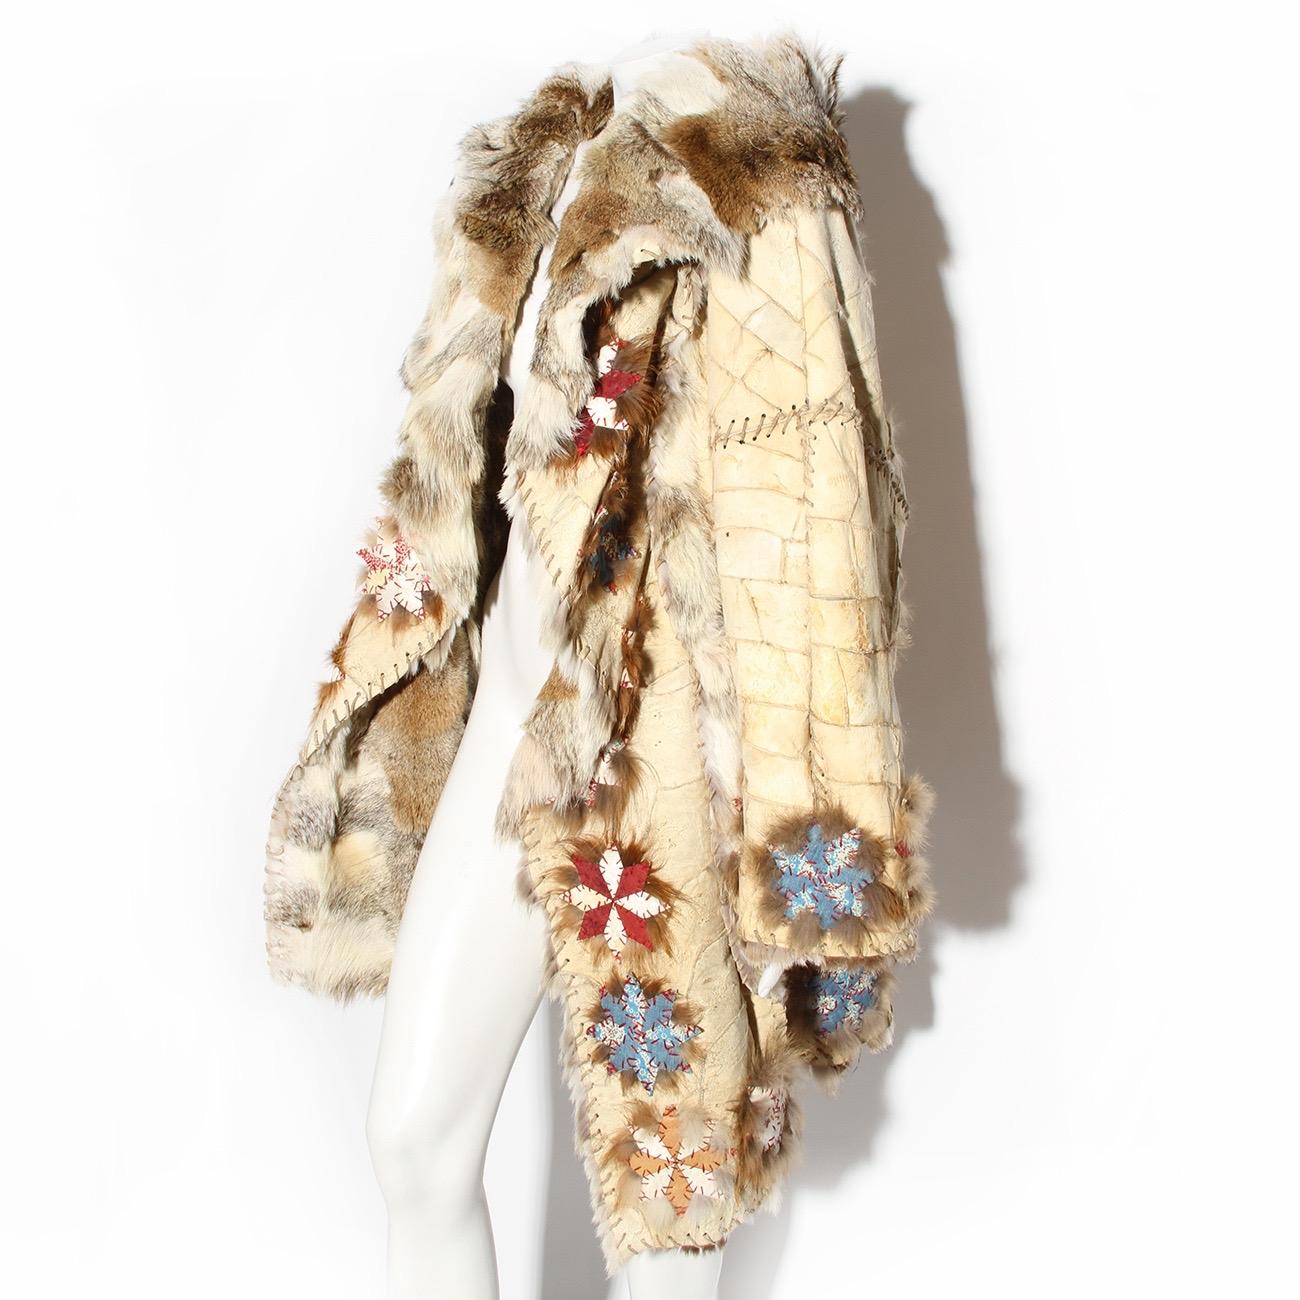 John Galliano Fur Coat 
Fall / Winter 2002 
Look 2 seen on Carmen Kass 
Vintage 
Made in France 
Exterior is tanned suede leather in a patchwork style
Interior of jacket is lined in fur 
Shawl style collar 
Leather thread stitch details 
Geometric